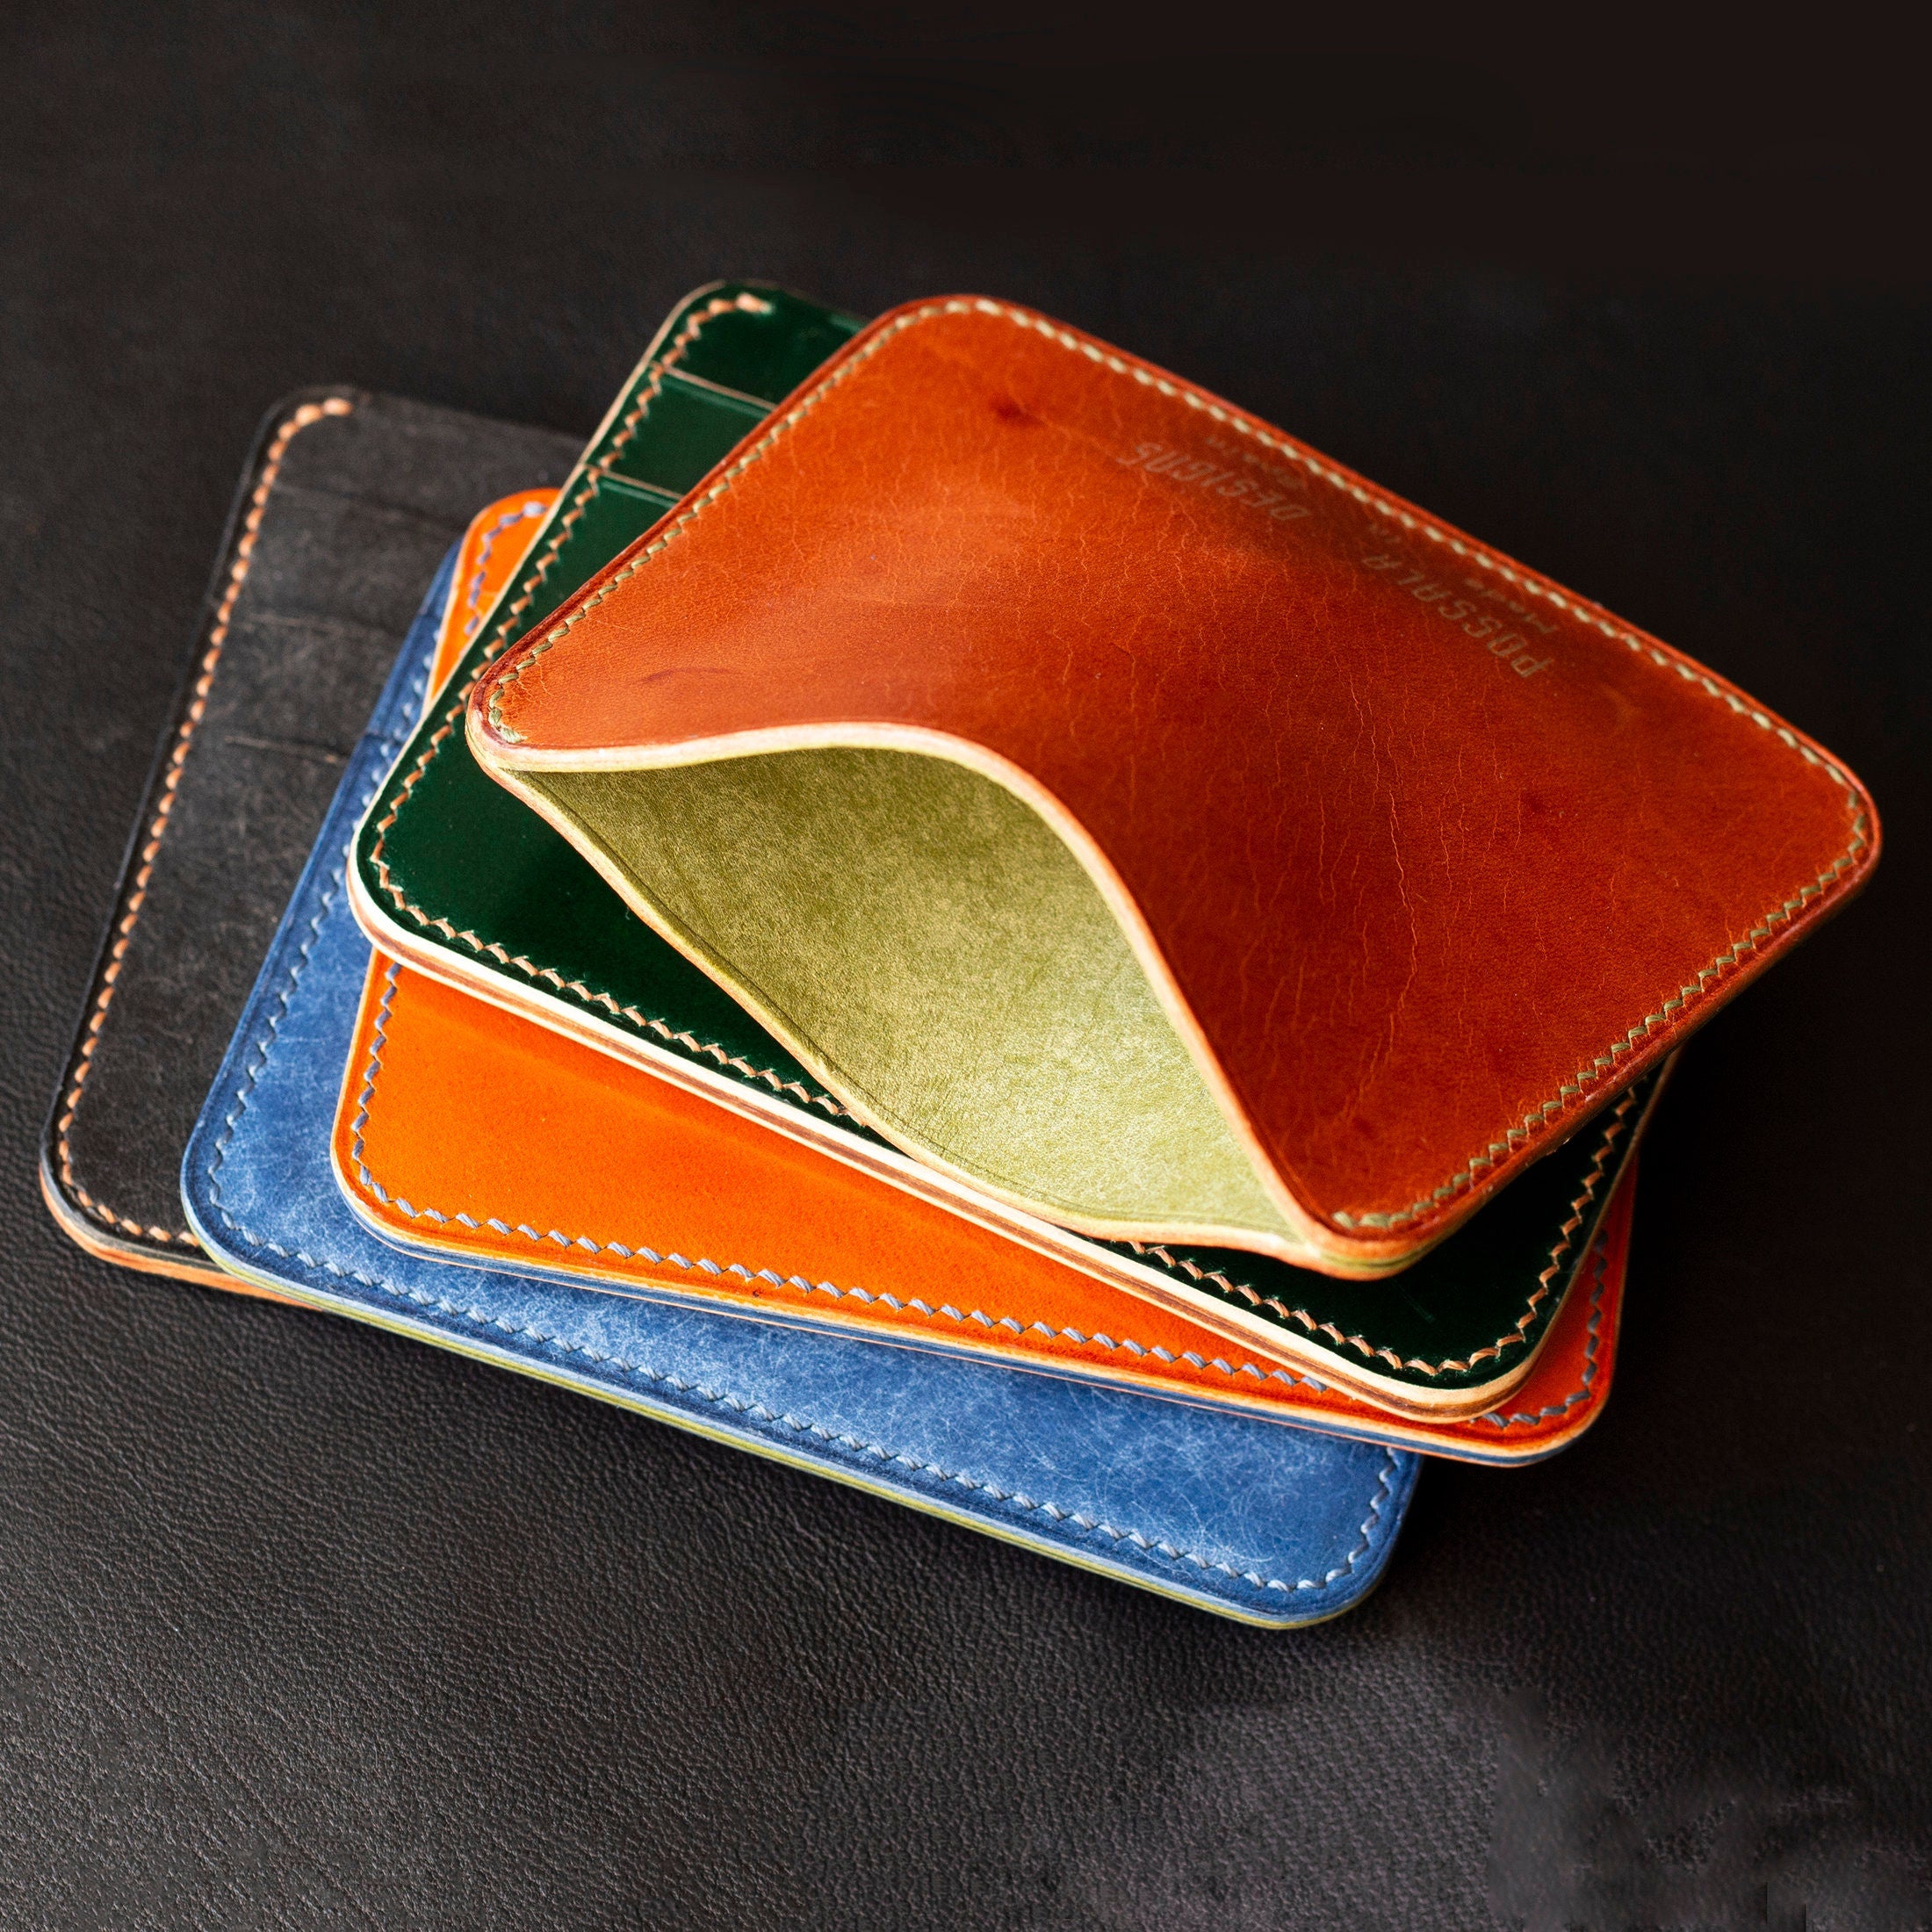 Minimalist Leather Card Wallet 3 pockets Orange and Blue Vegetable Tanned Italian Leather, Handmade Card Holder in Spain Handcrafted